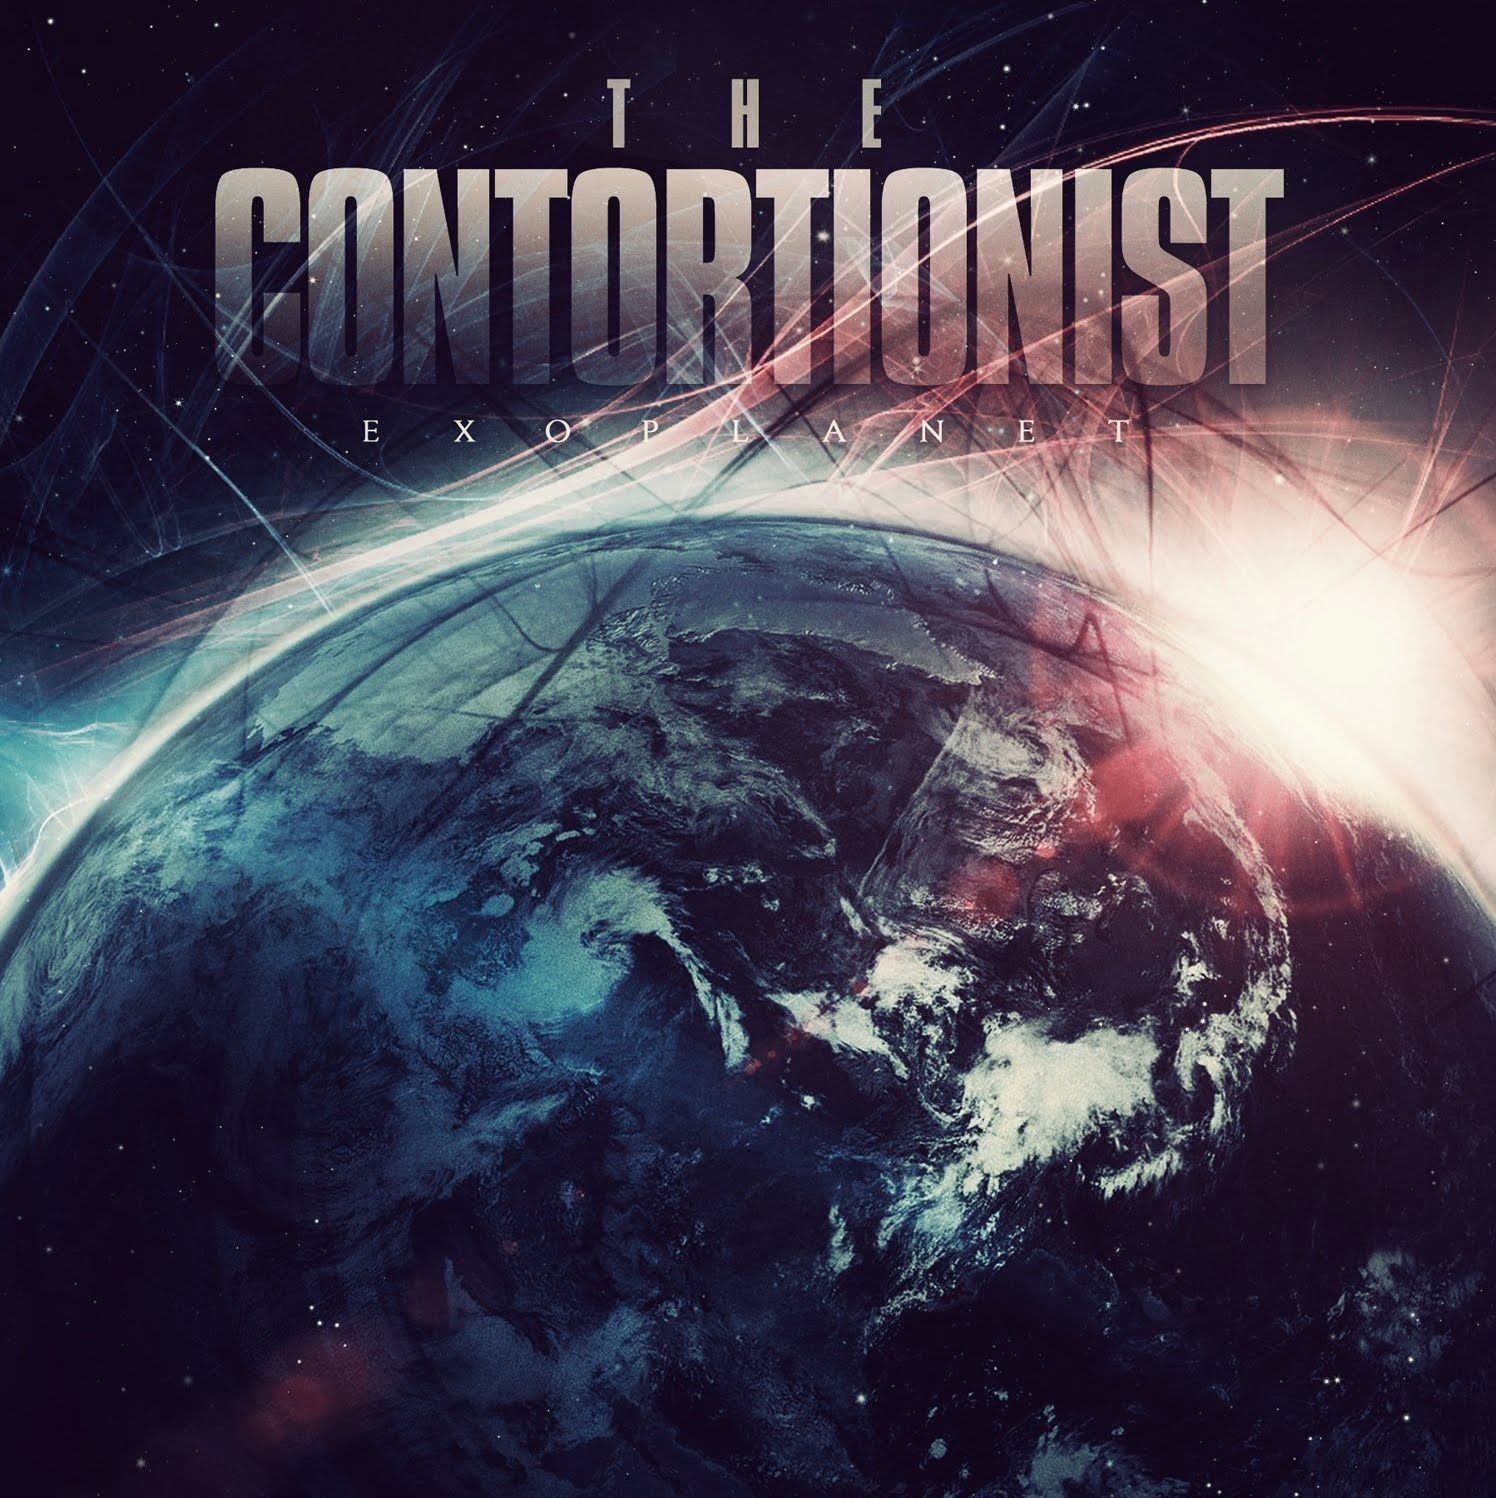 THE CONTORTIONIST - Exoplanet cover 